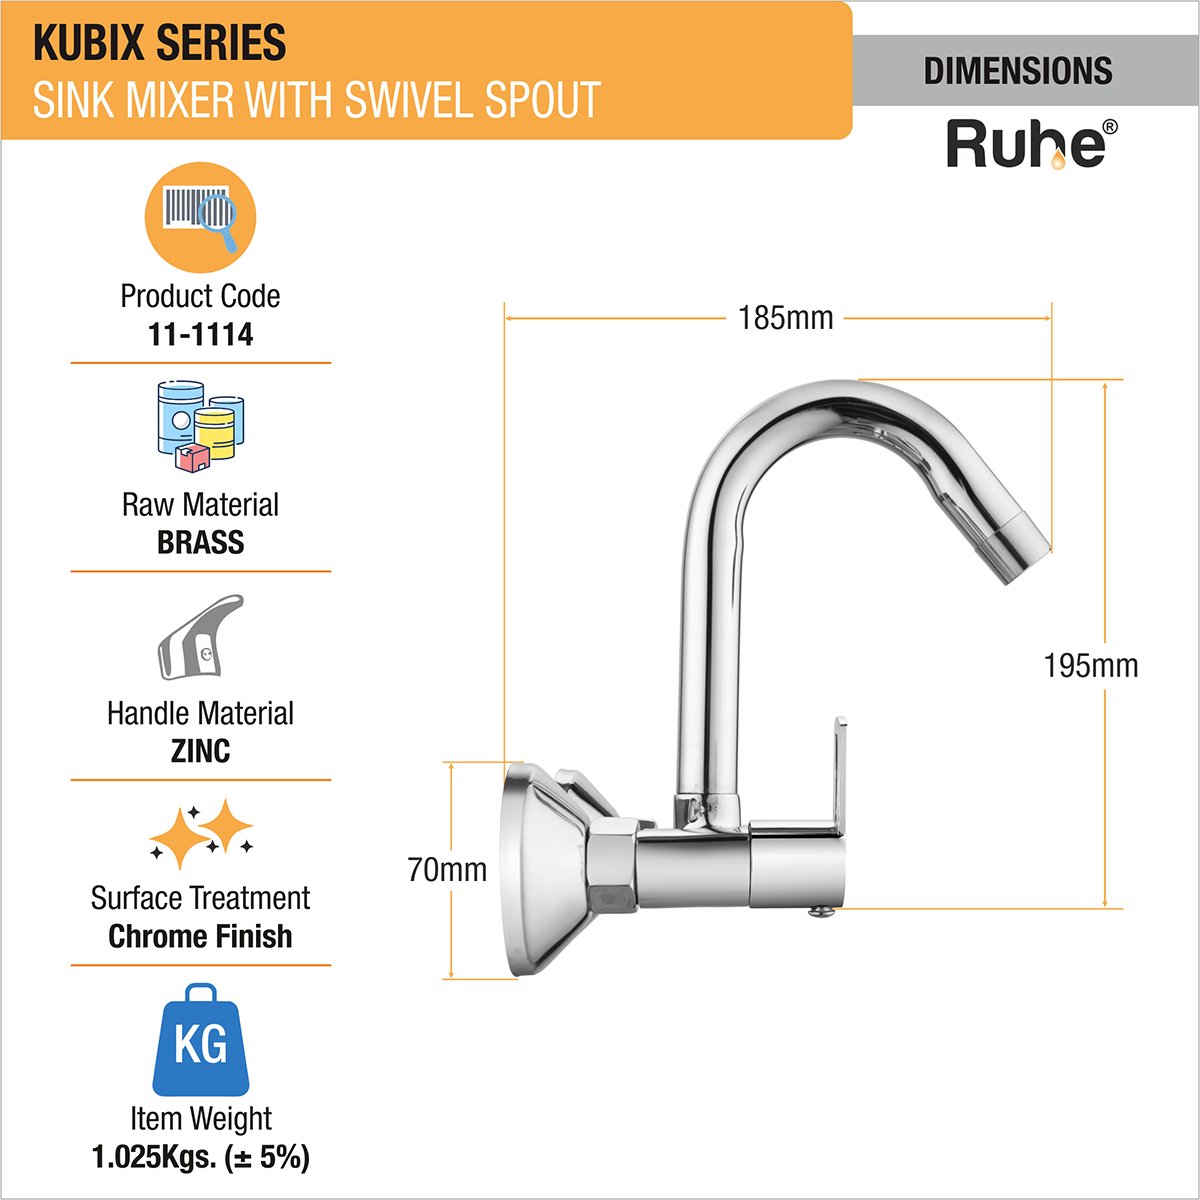 Kubix Sink Mixer with Small (12 inches) Round Swivel Spout Faucet dimensions and size